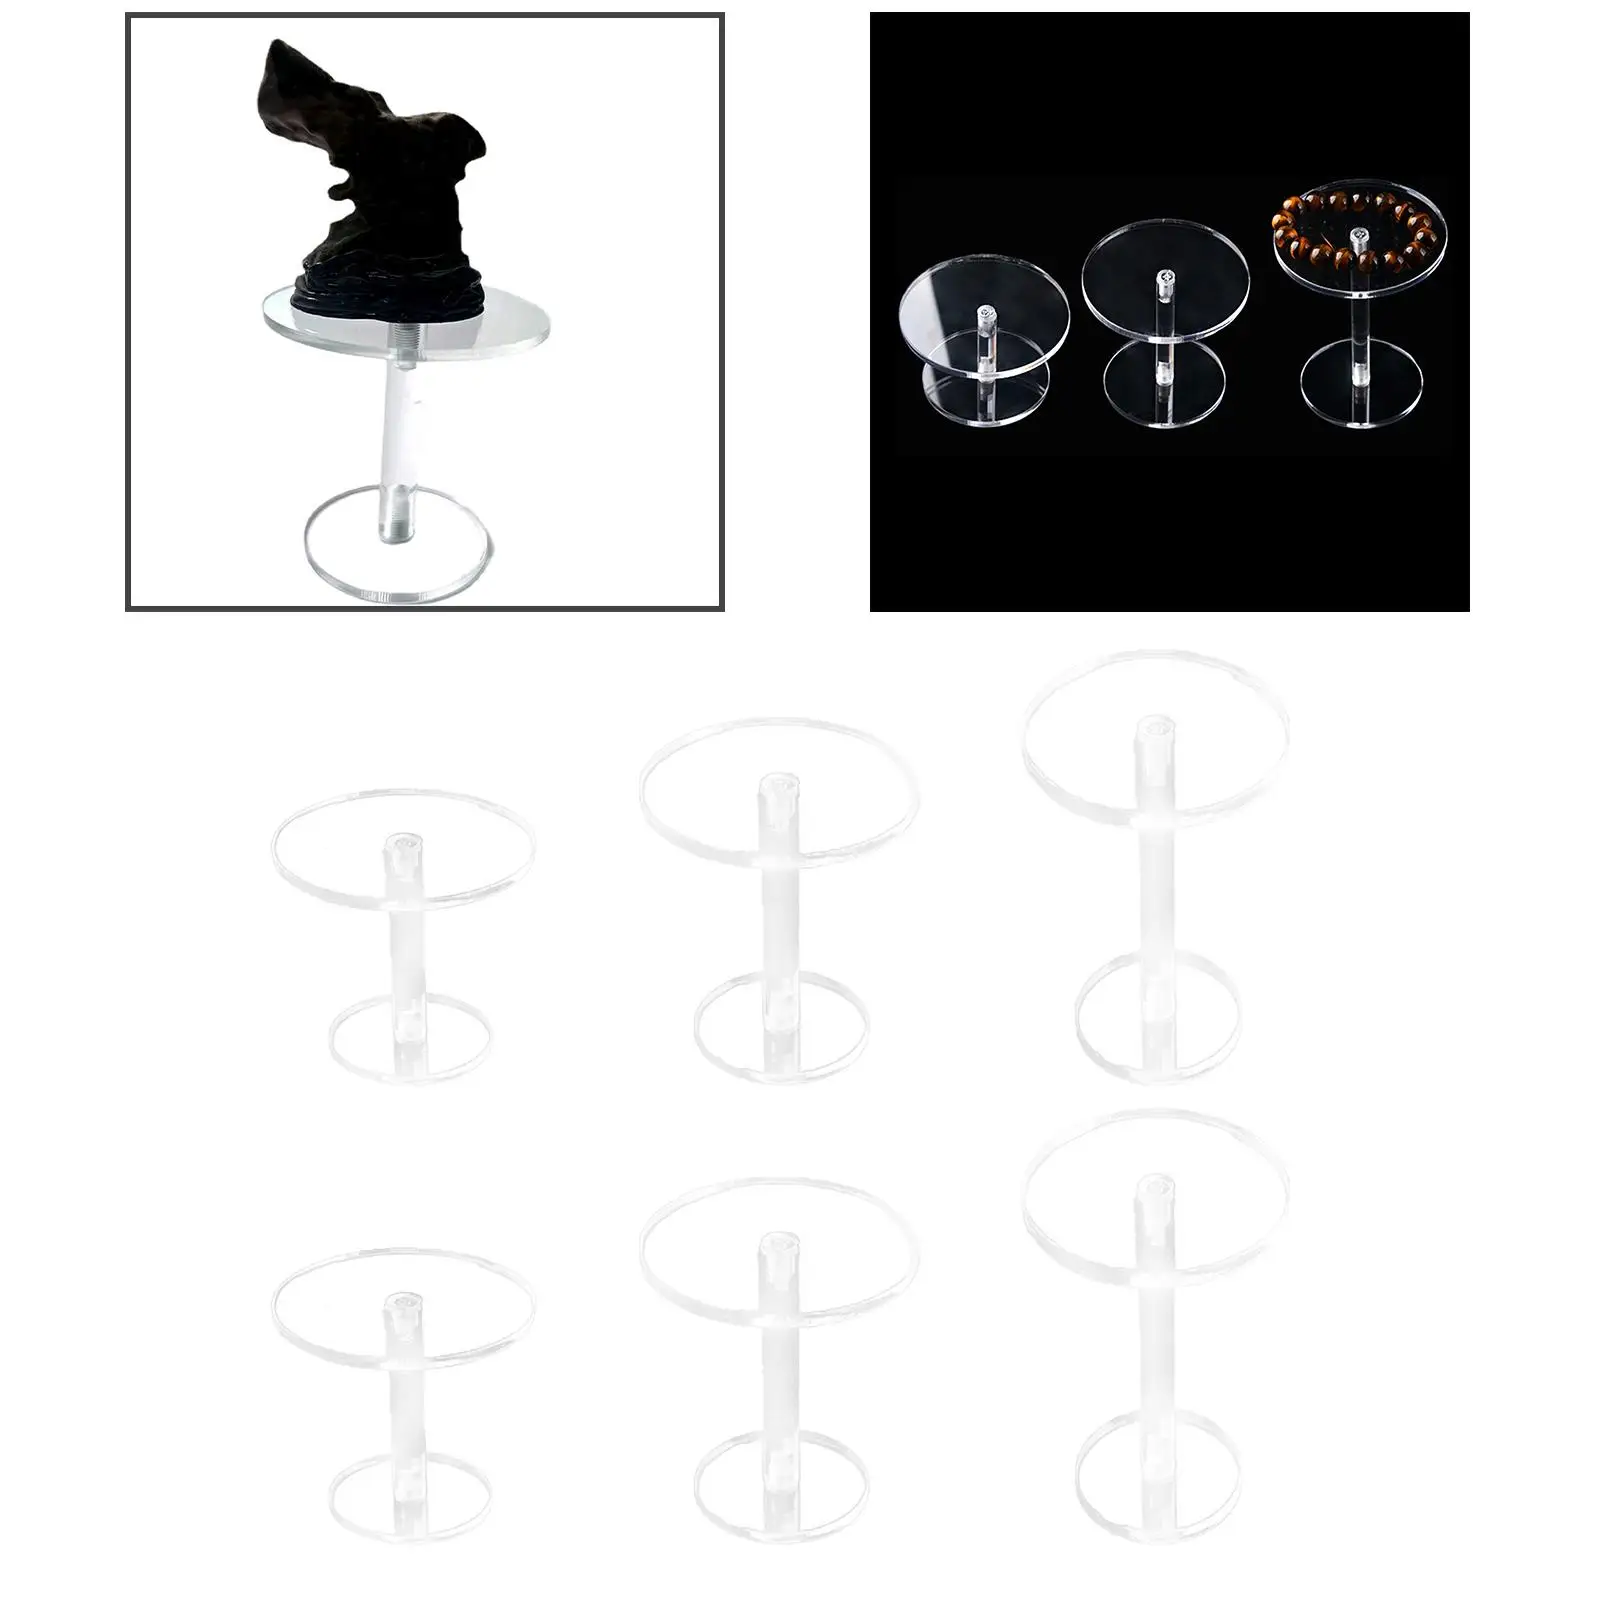 2Pcs Pedestal Display Riser Stands Clear Portable Modern Durable Jewelry Display Stand for Dresser Top Keychain Tabletop Watches